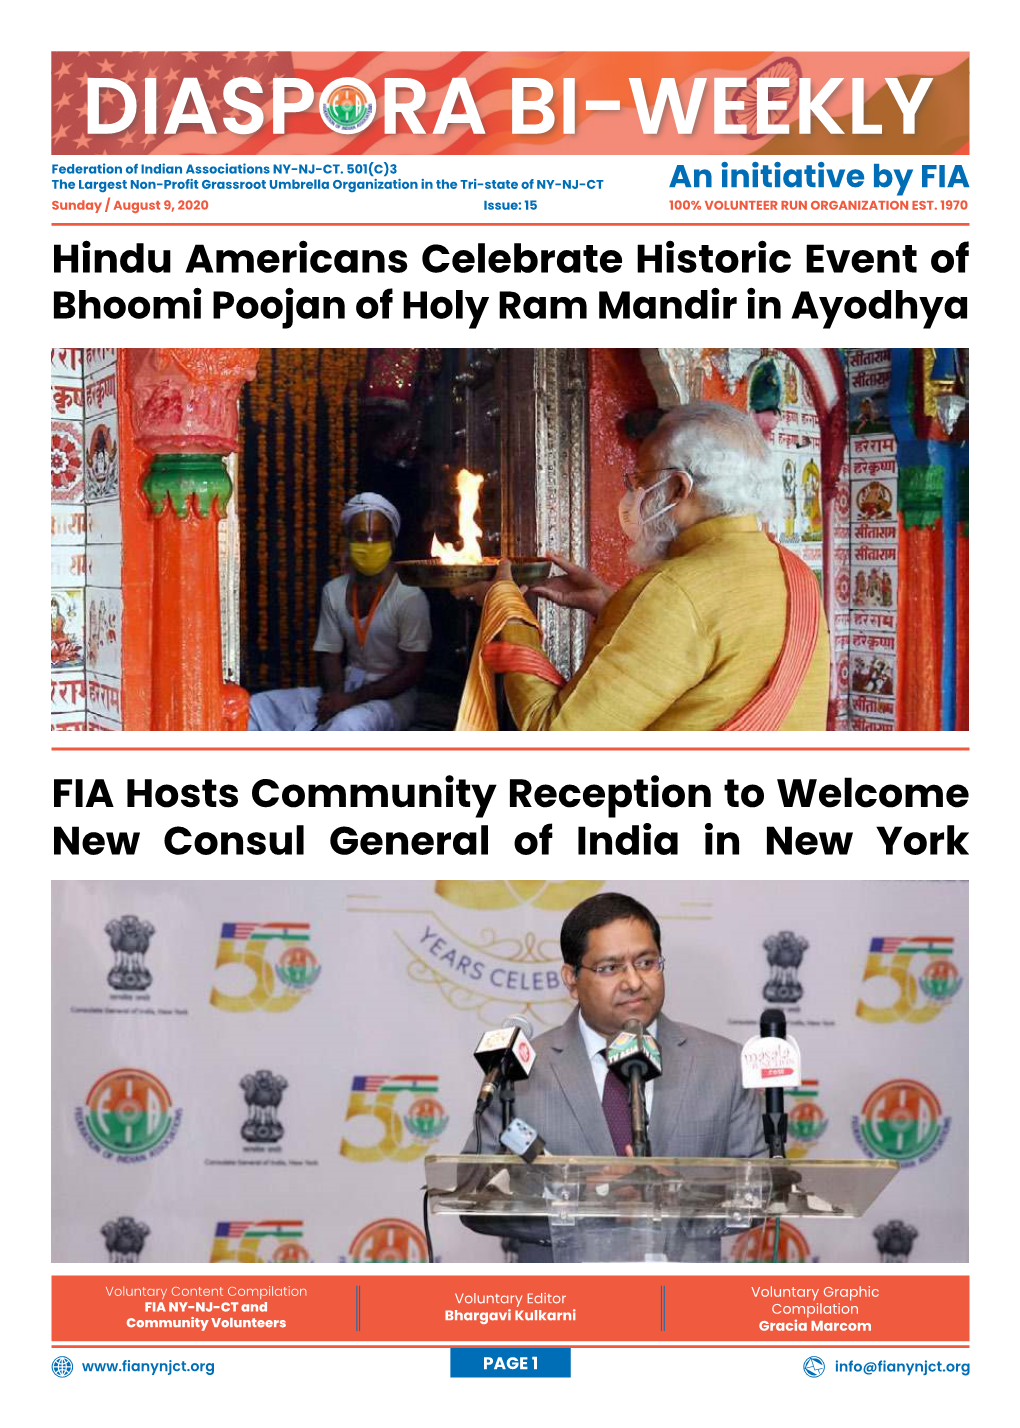 FIA Hosts Community Reception to Welcome New Consul General of India in New York